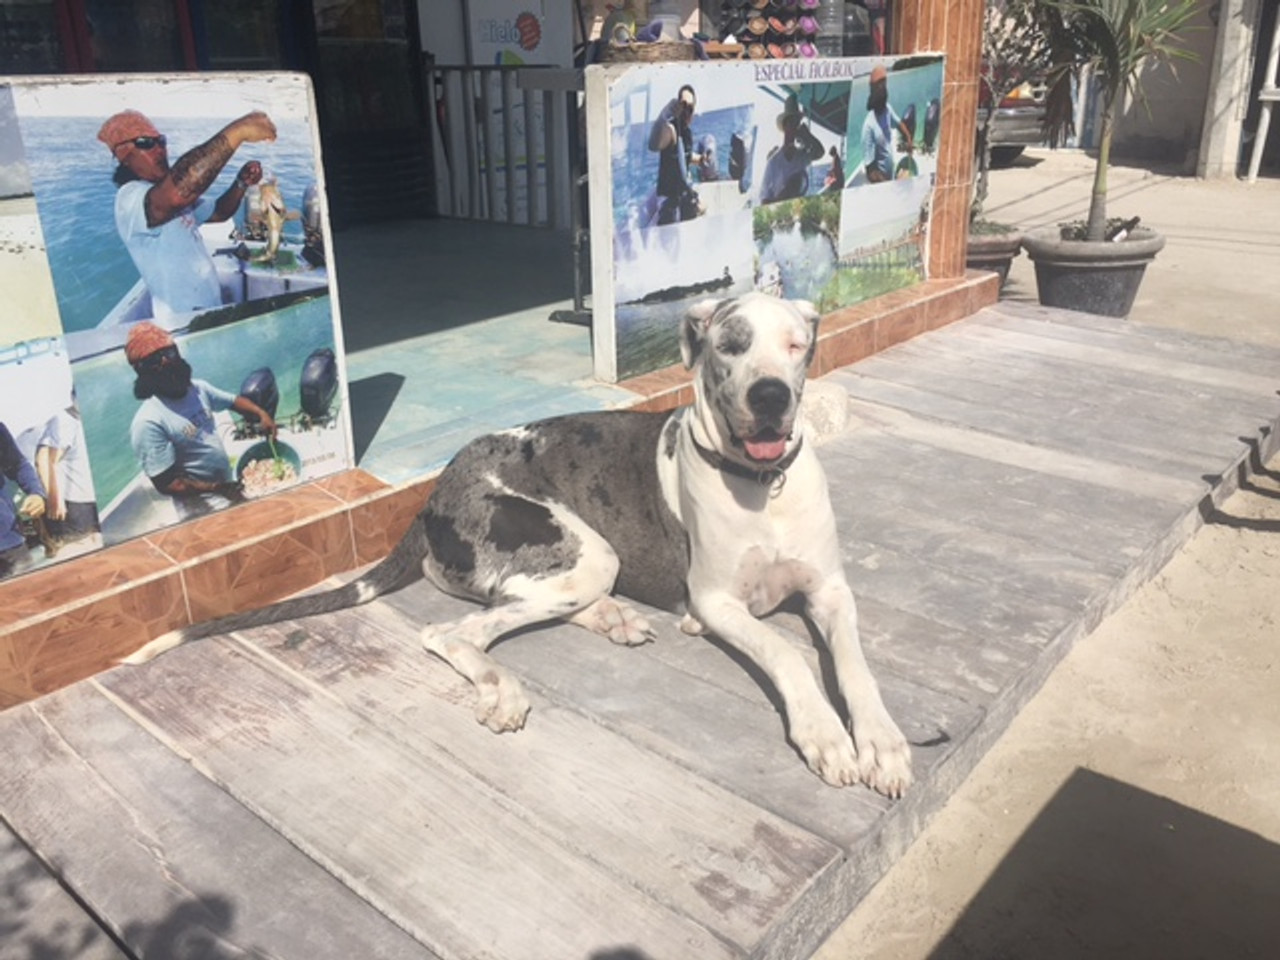 The Dogs of Holbox Island - Is this Where Dogs go to Heaven?